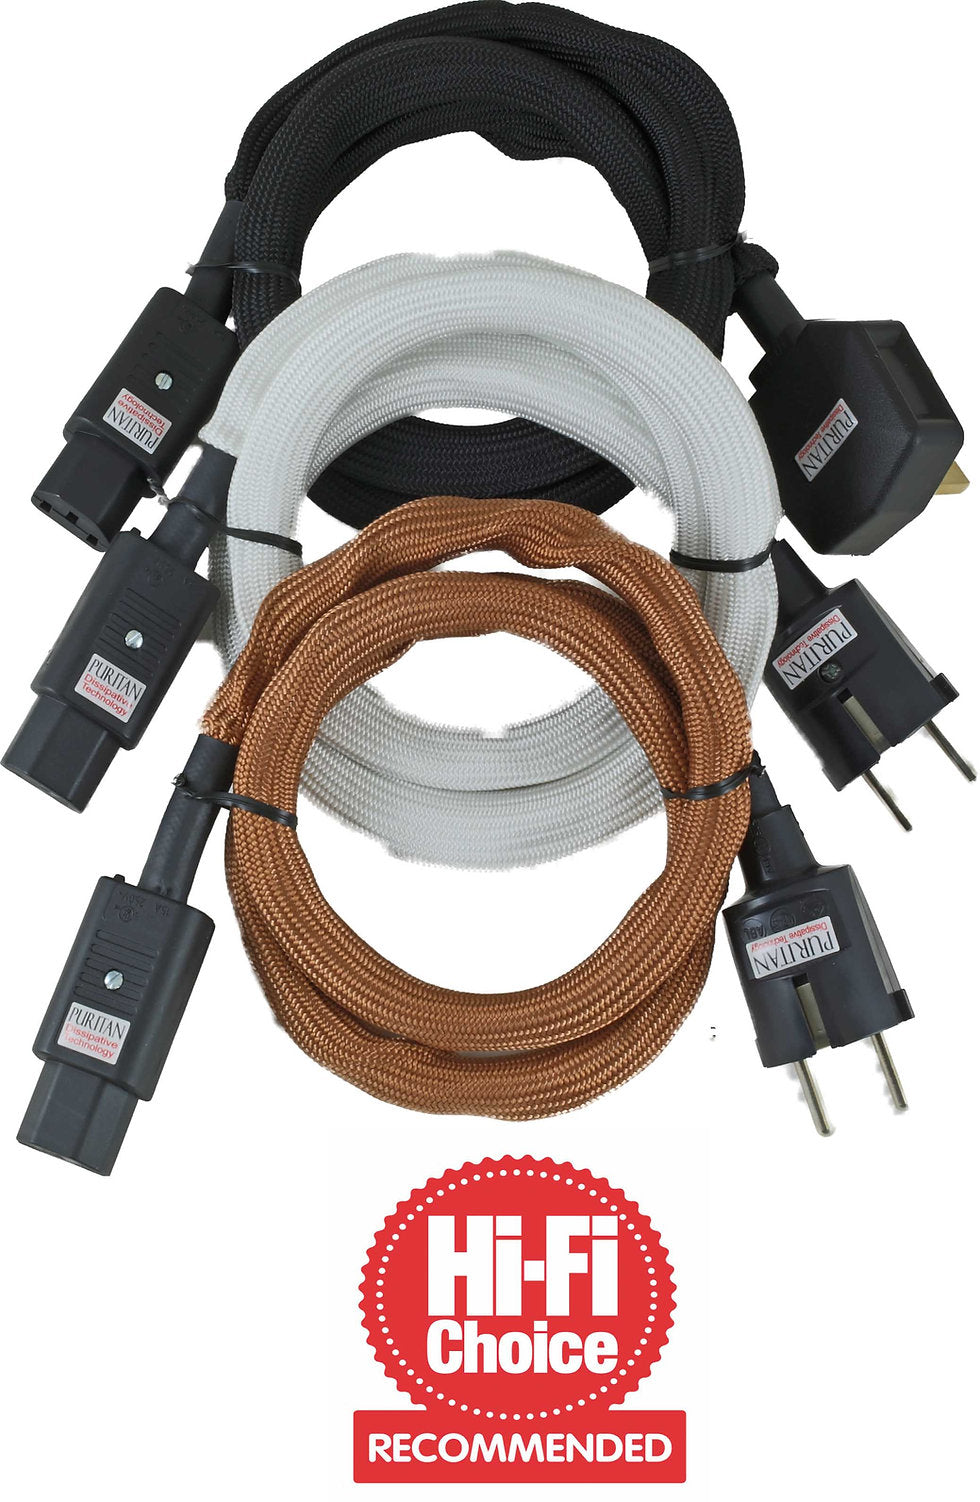 Puritan CLASSIC Mains Cables For Audiophile Performance